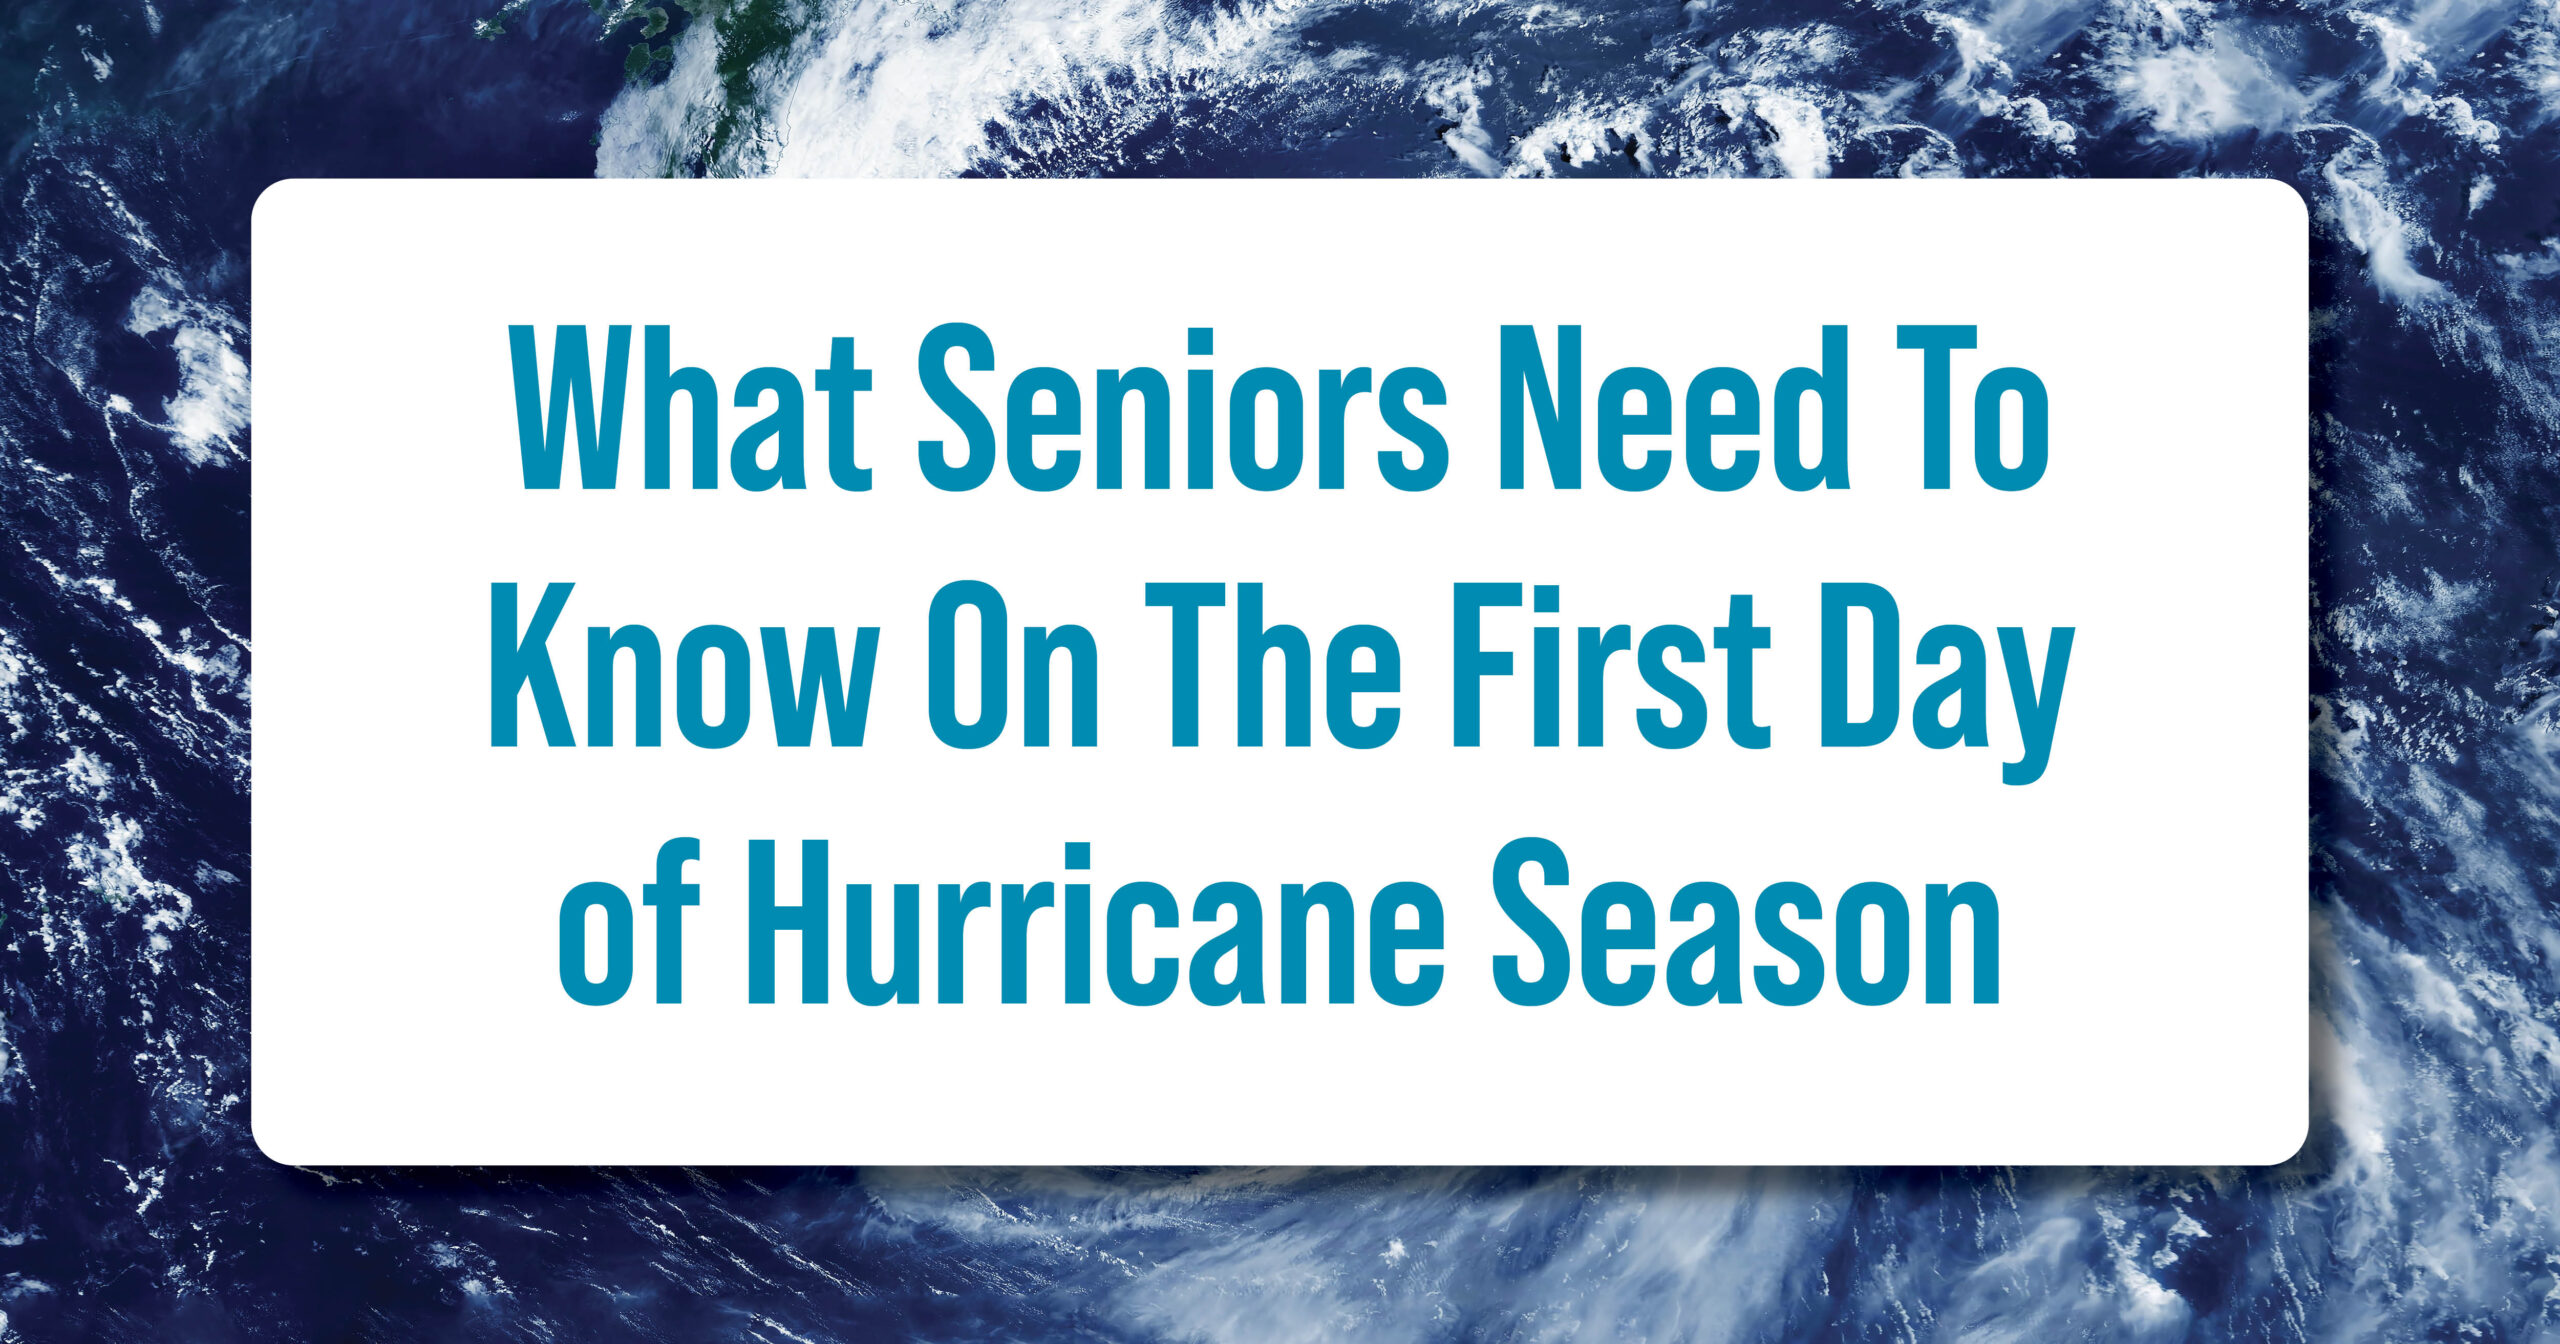 What Seniors Need To Know On The First Day of Hurricane Season